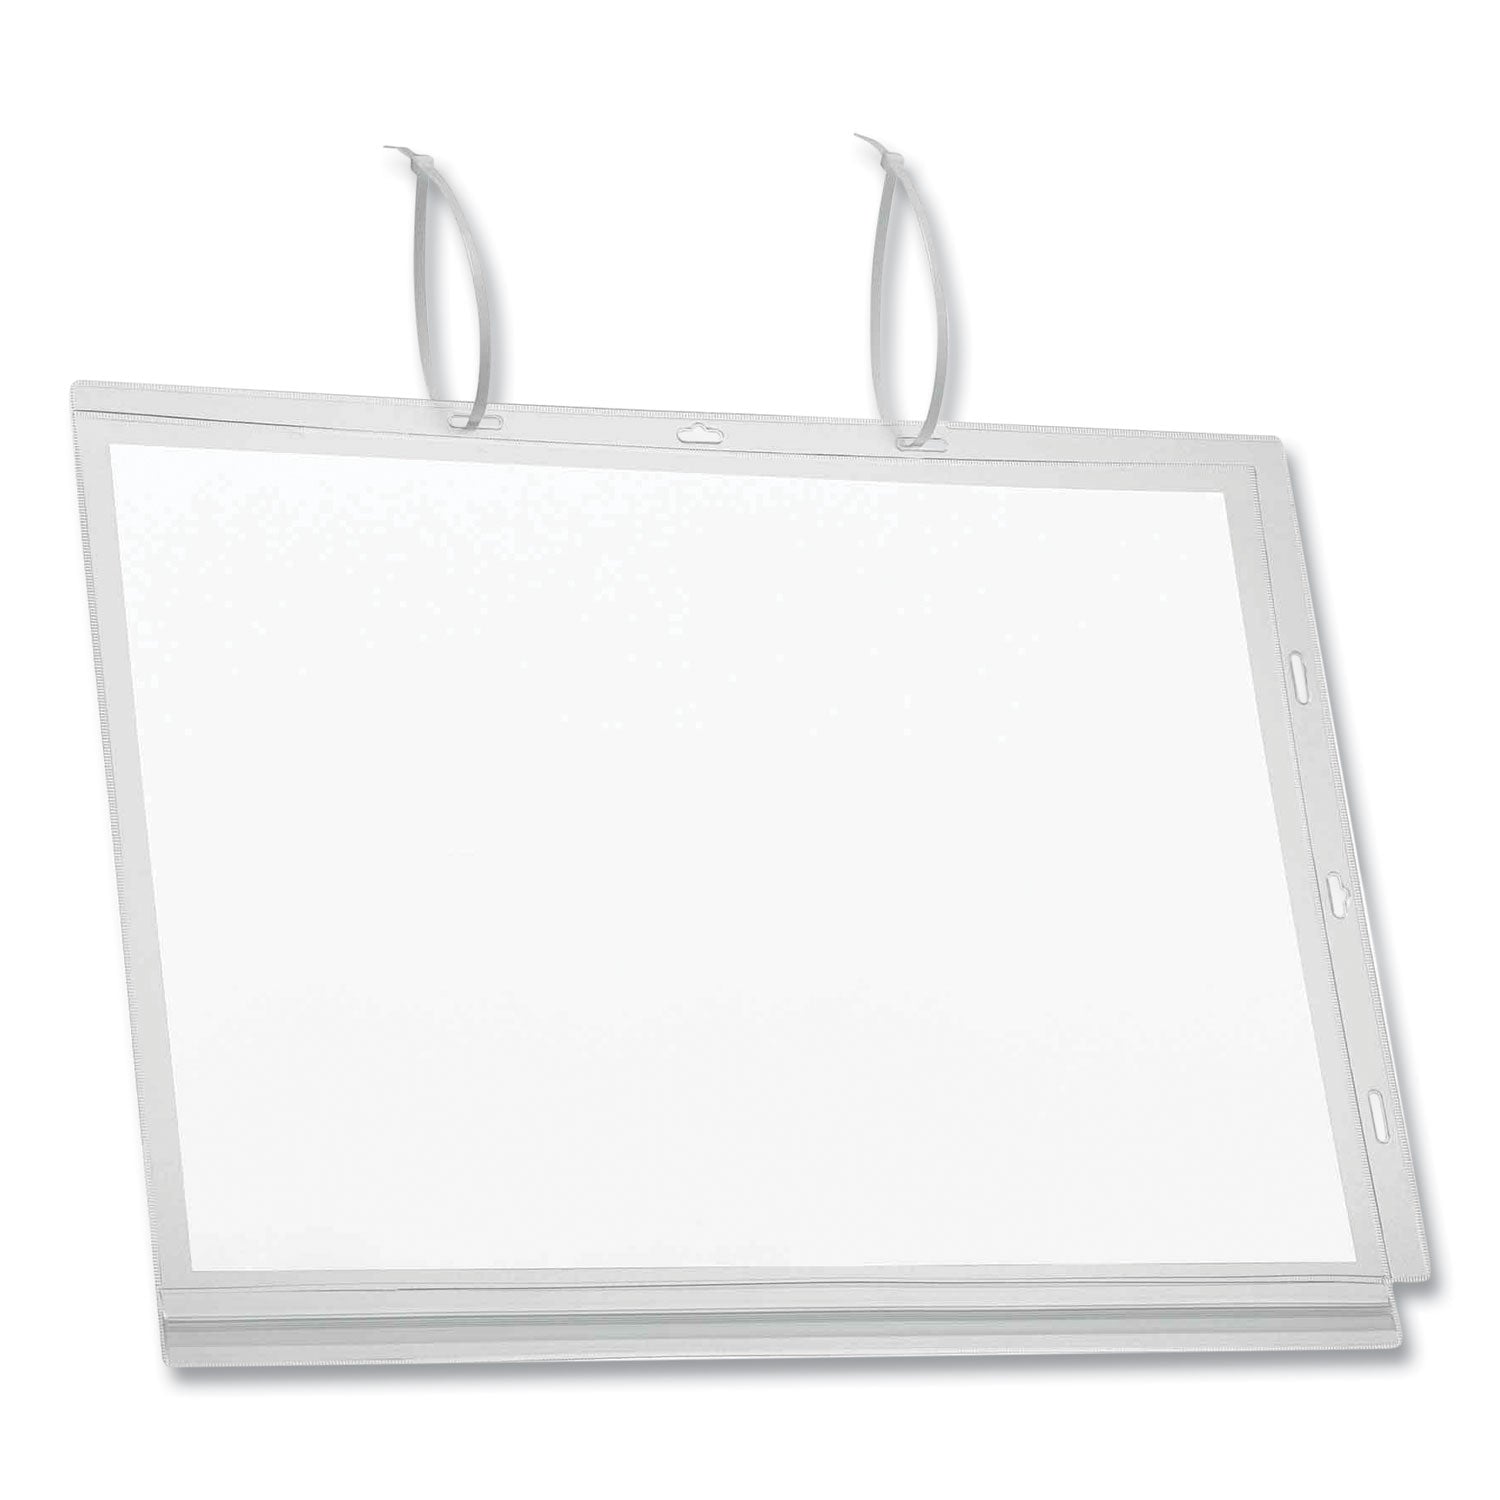 water-resistant-sign-holder-pockets-with-cable-ties-11-x-17-clear-frame-5-pack_dbl502819 - 1